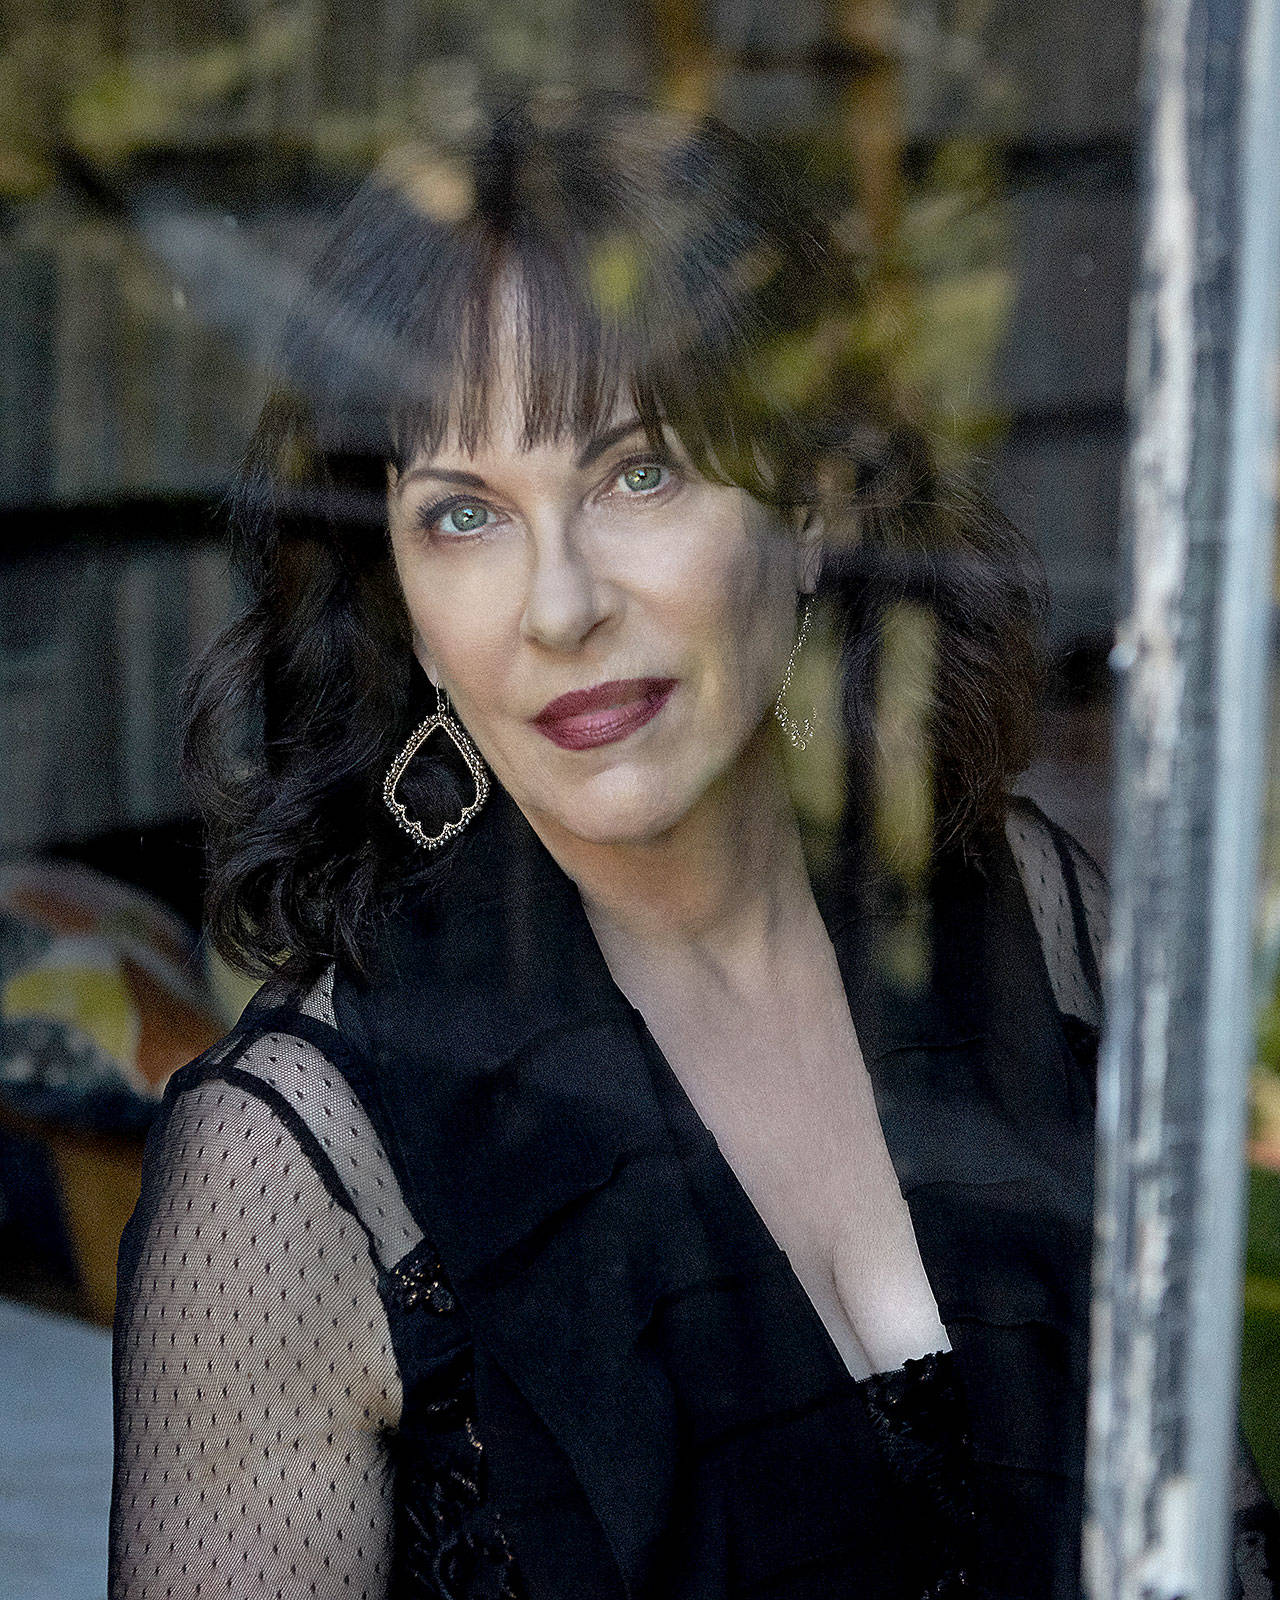 Janiva Magness headlines the Legends of the Blues VII concert Saturday evening in Arlington. (Paul Moore)